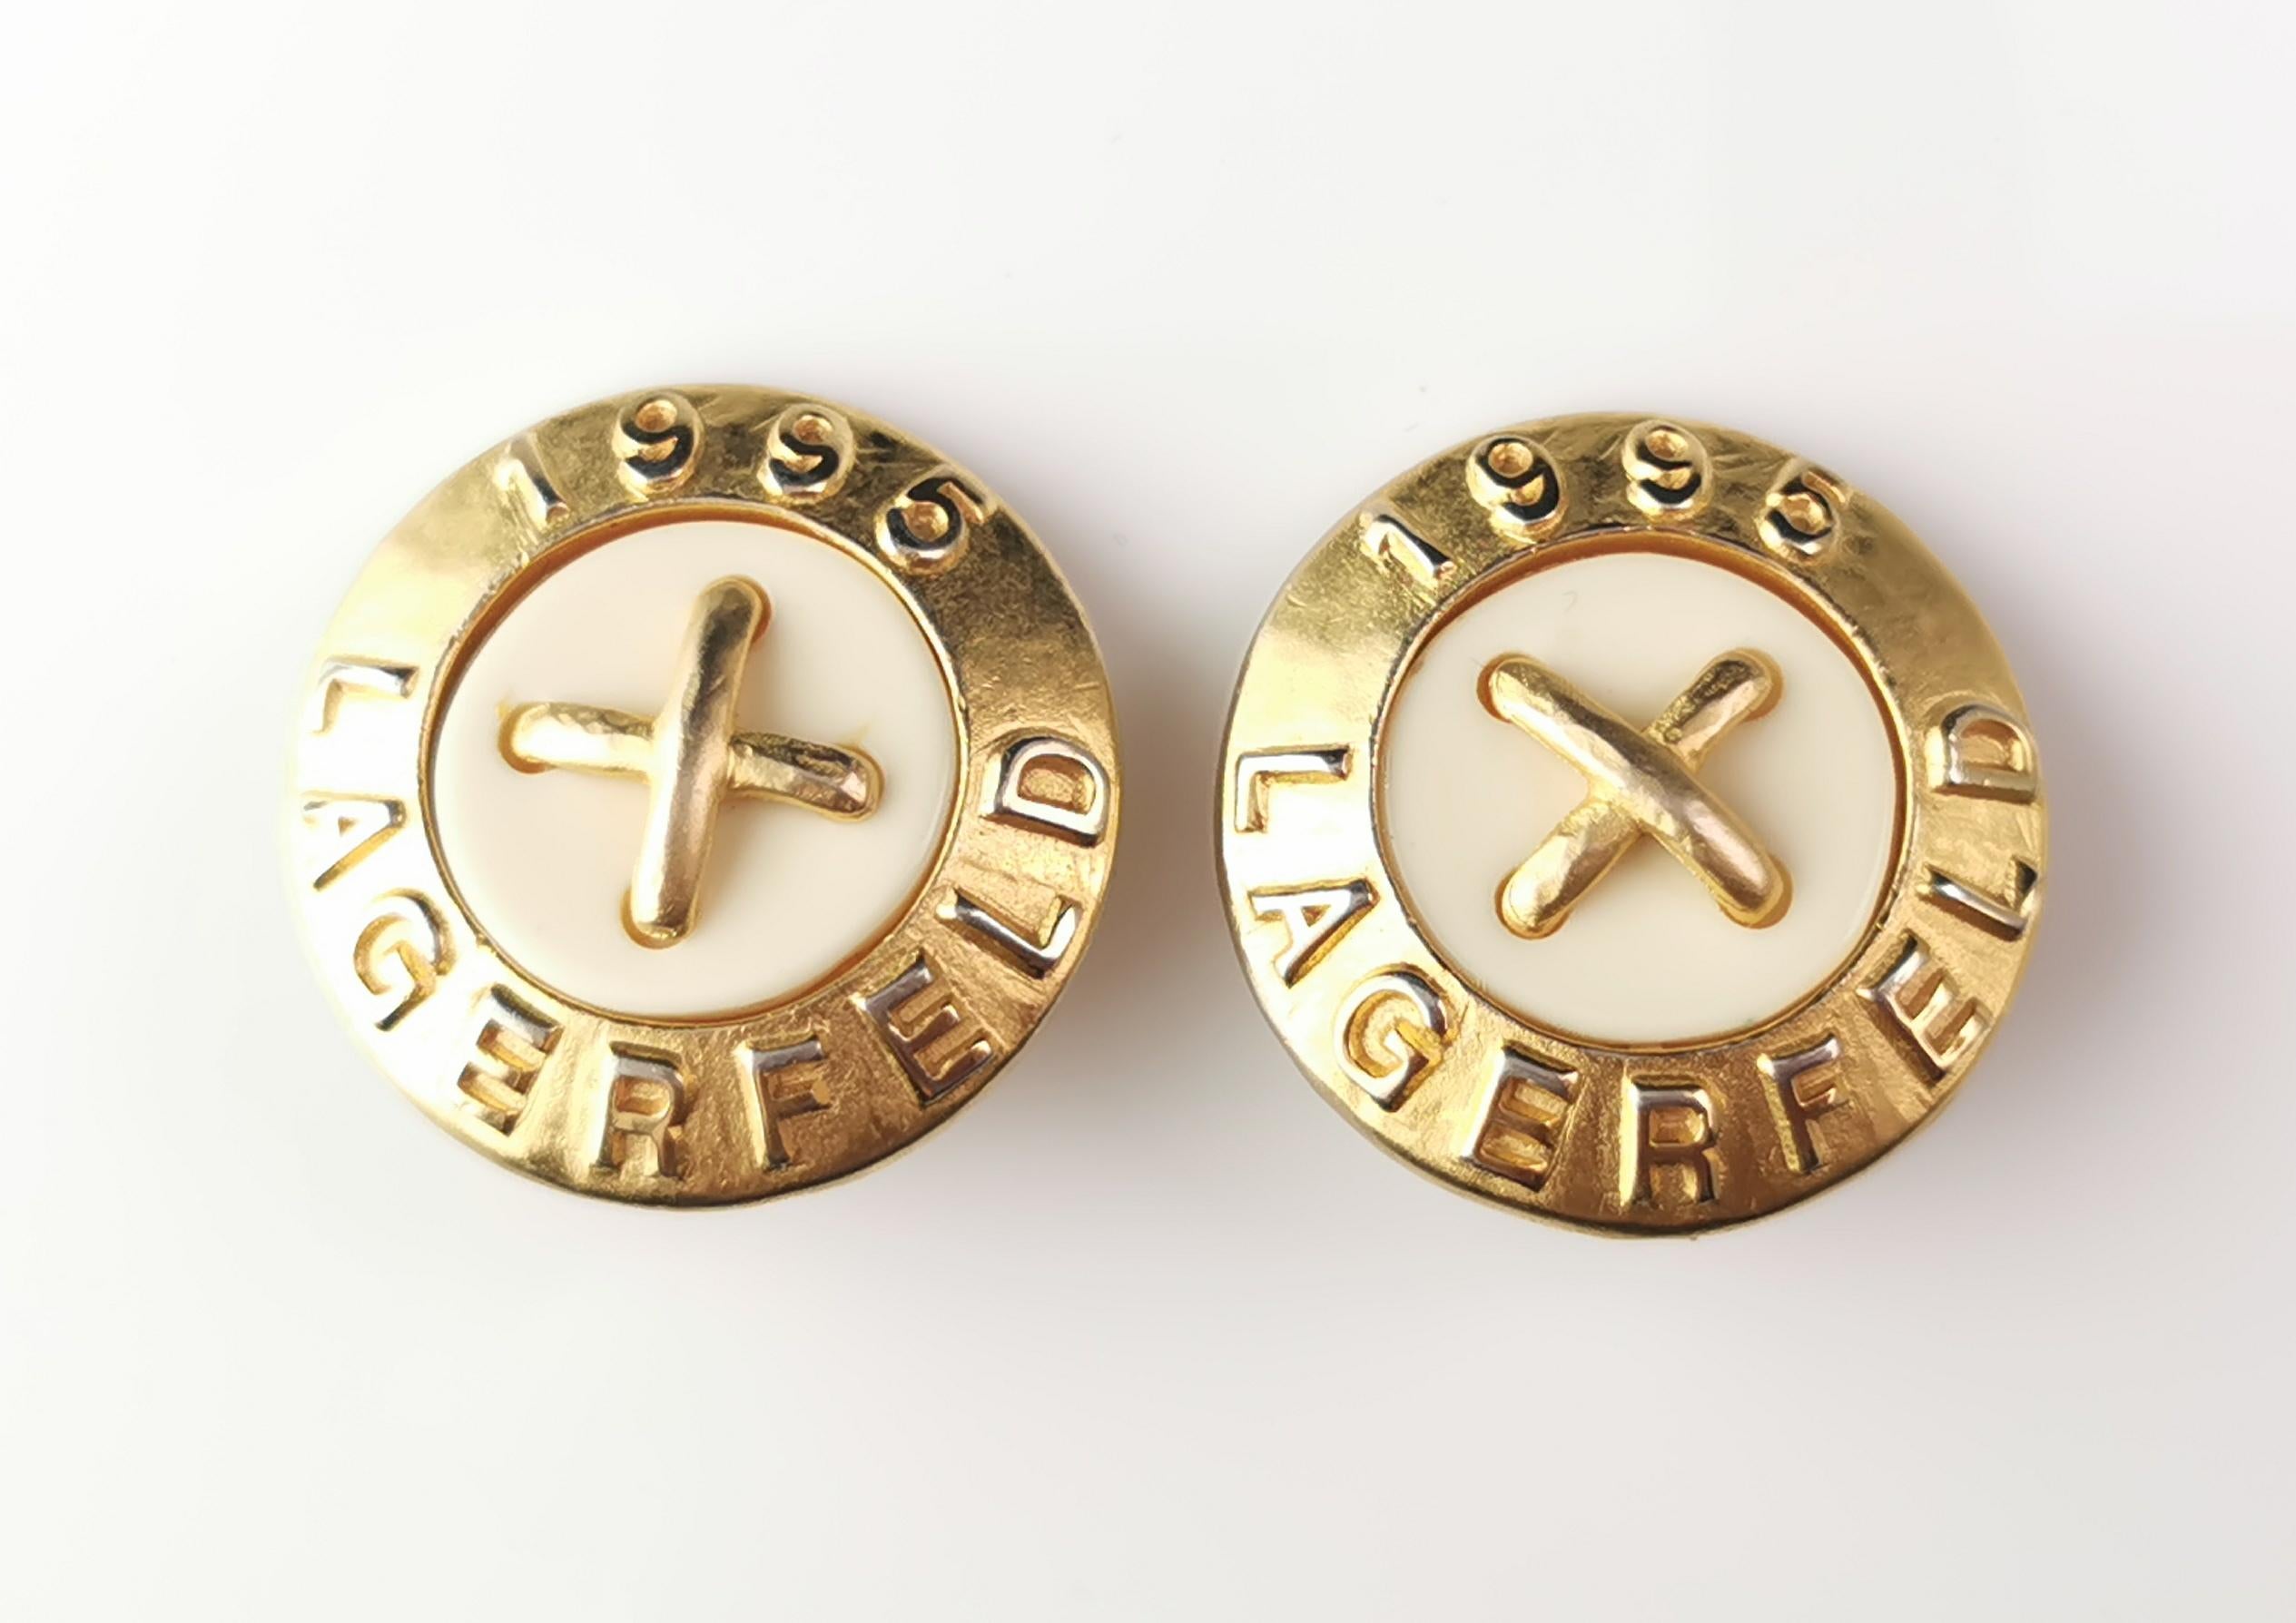 A rare pair of vintage Karl Lagerfeld 1995 clip on earrings.

These are large earrings in a matte gold tone metal with Karl Lagerfeld and 1995 in relief around the circular rim.

They feature a large cream circle to the centre with gold tone